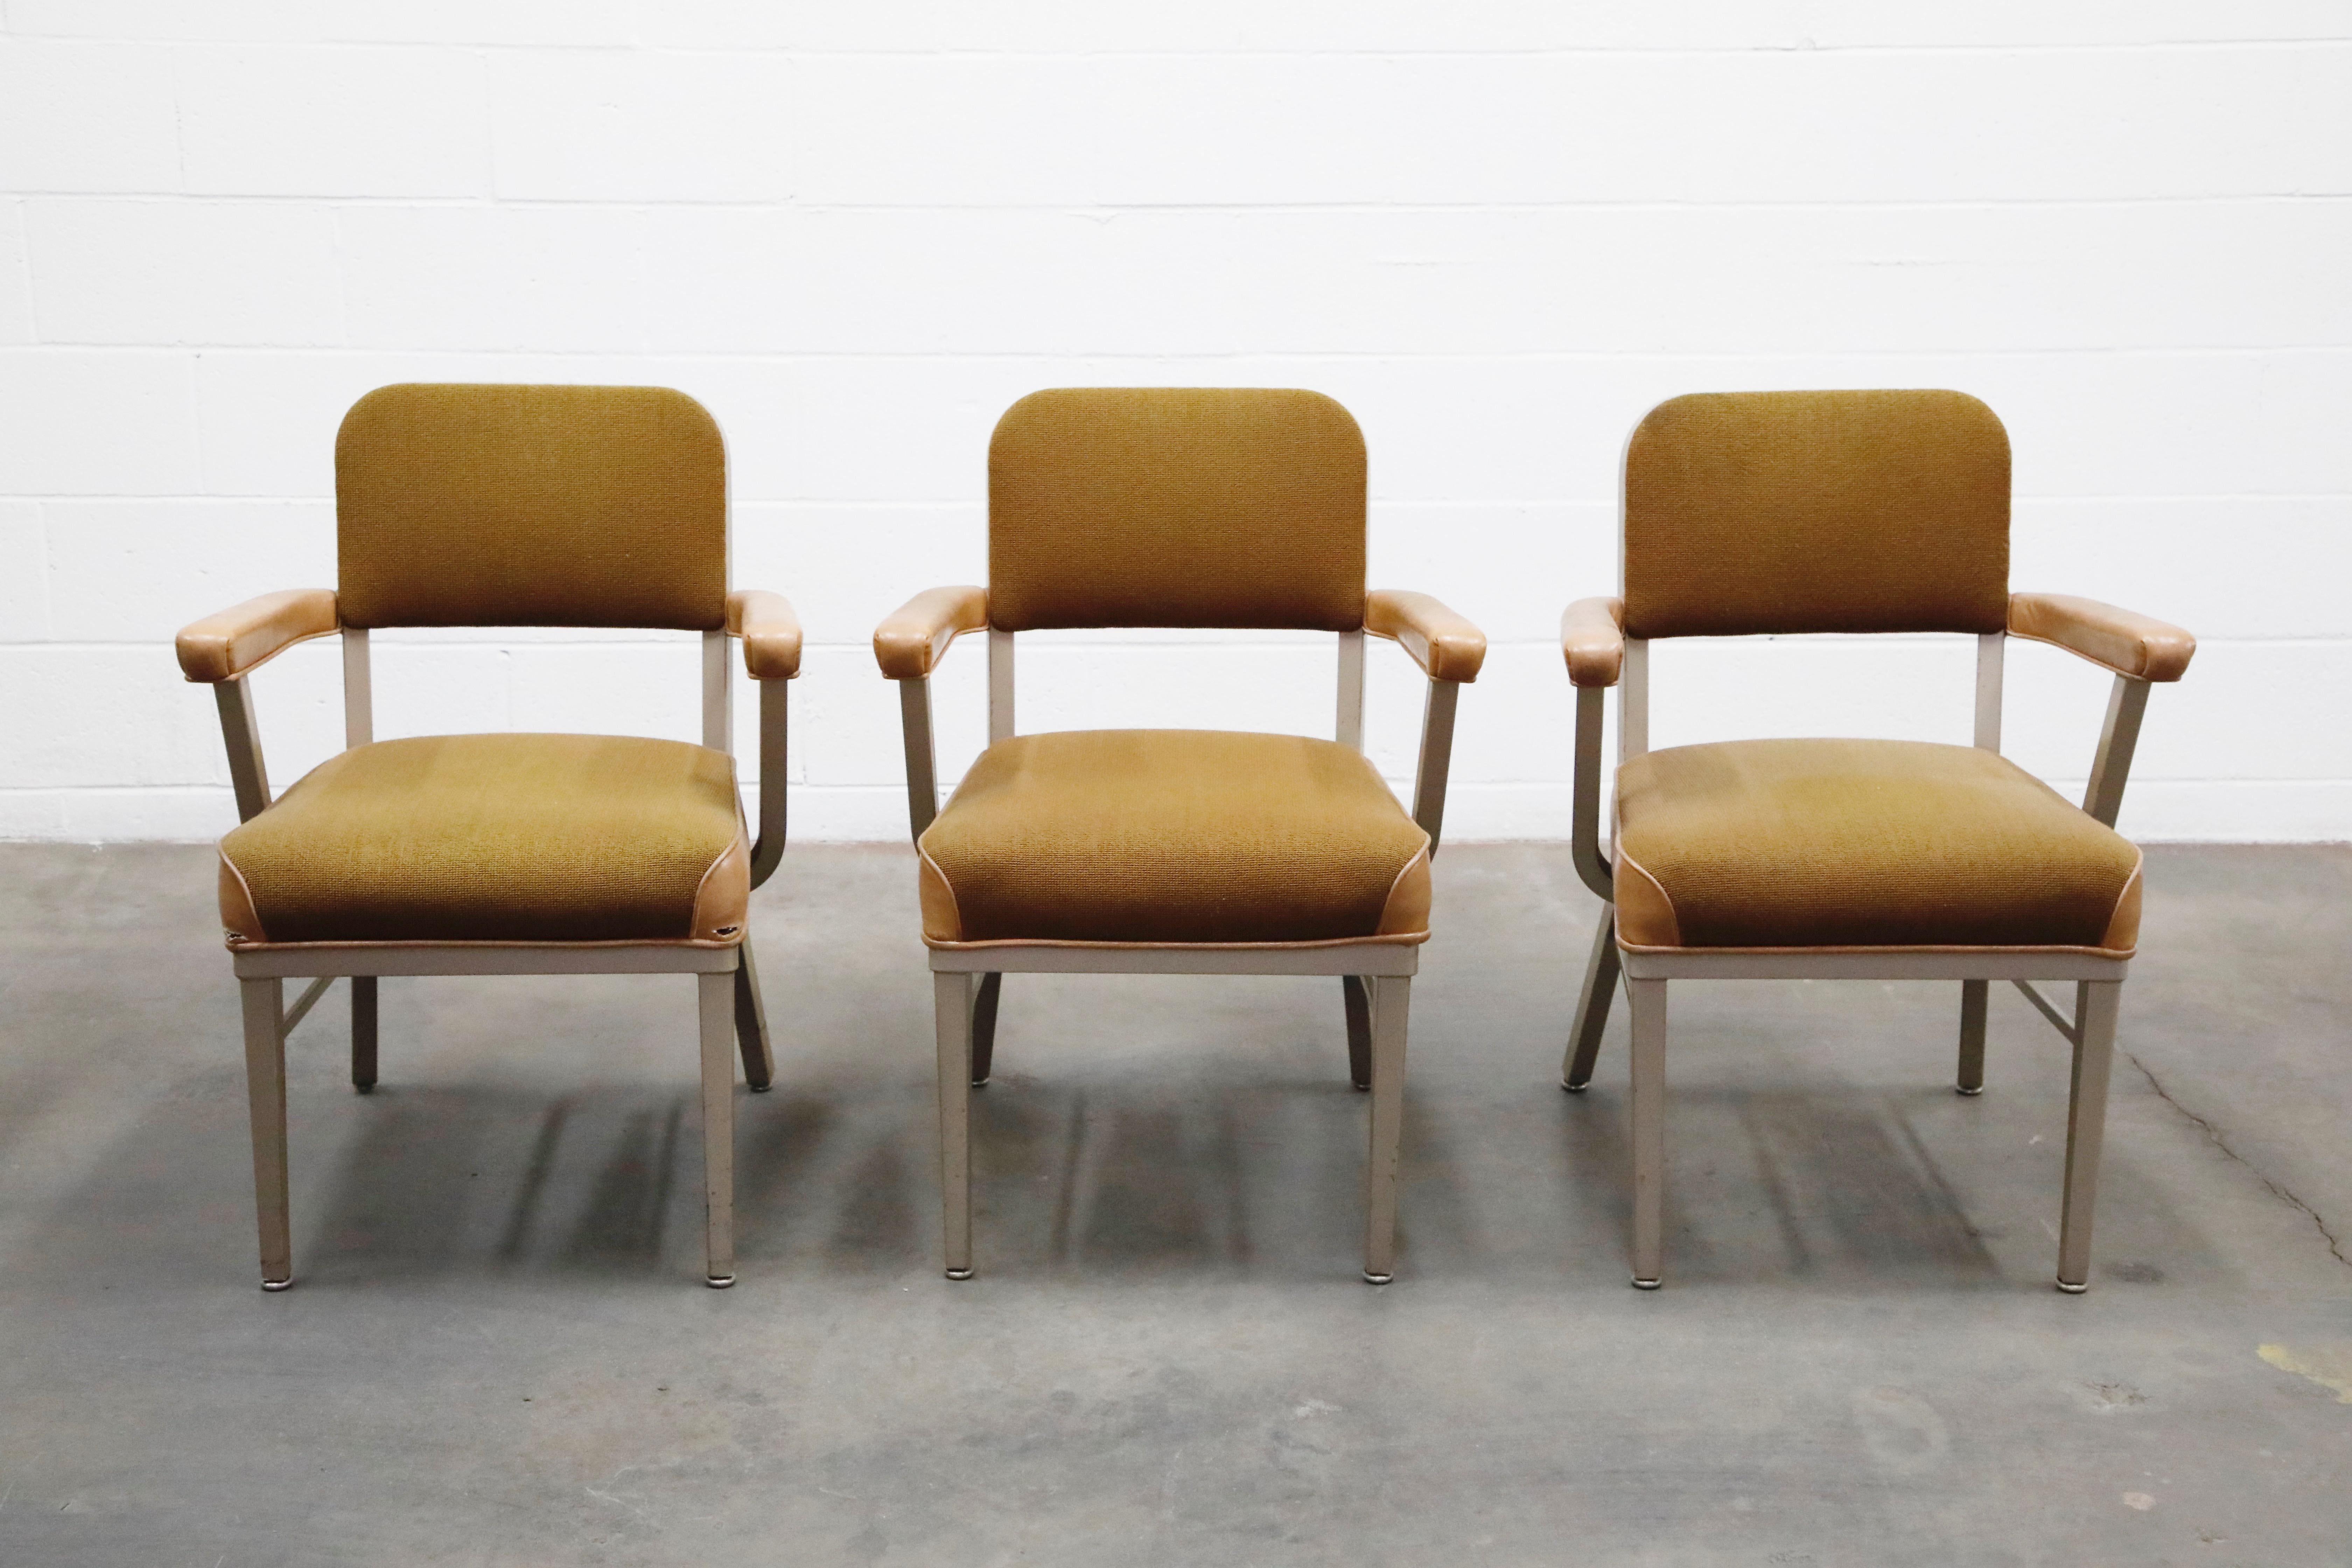 A classic industrial office armchairs by McDowell-Craig, circa 1960, signed underneath with labels. Chairs are priced individually, three are available. Constructed with steel frames and upholstered arm pads, leatherette and fabric upholstery.